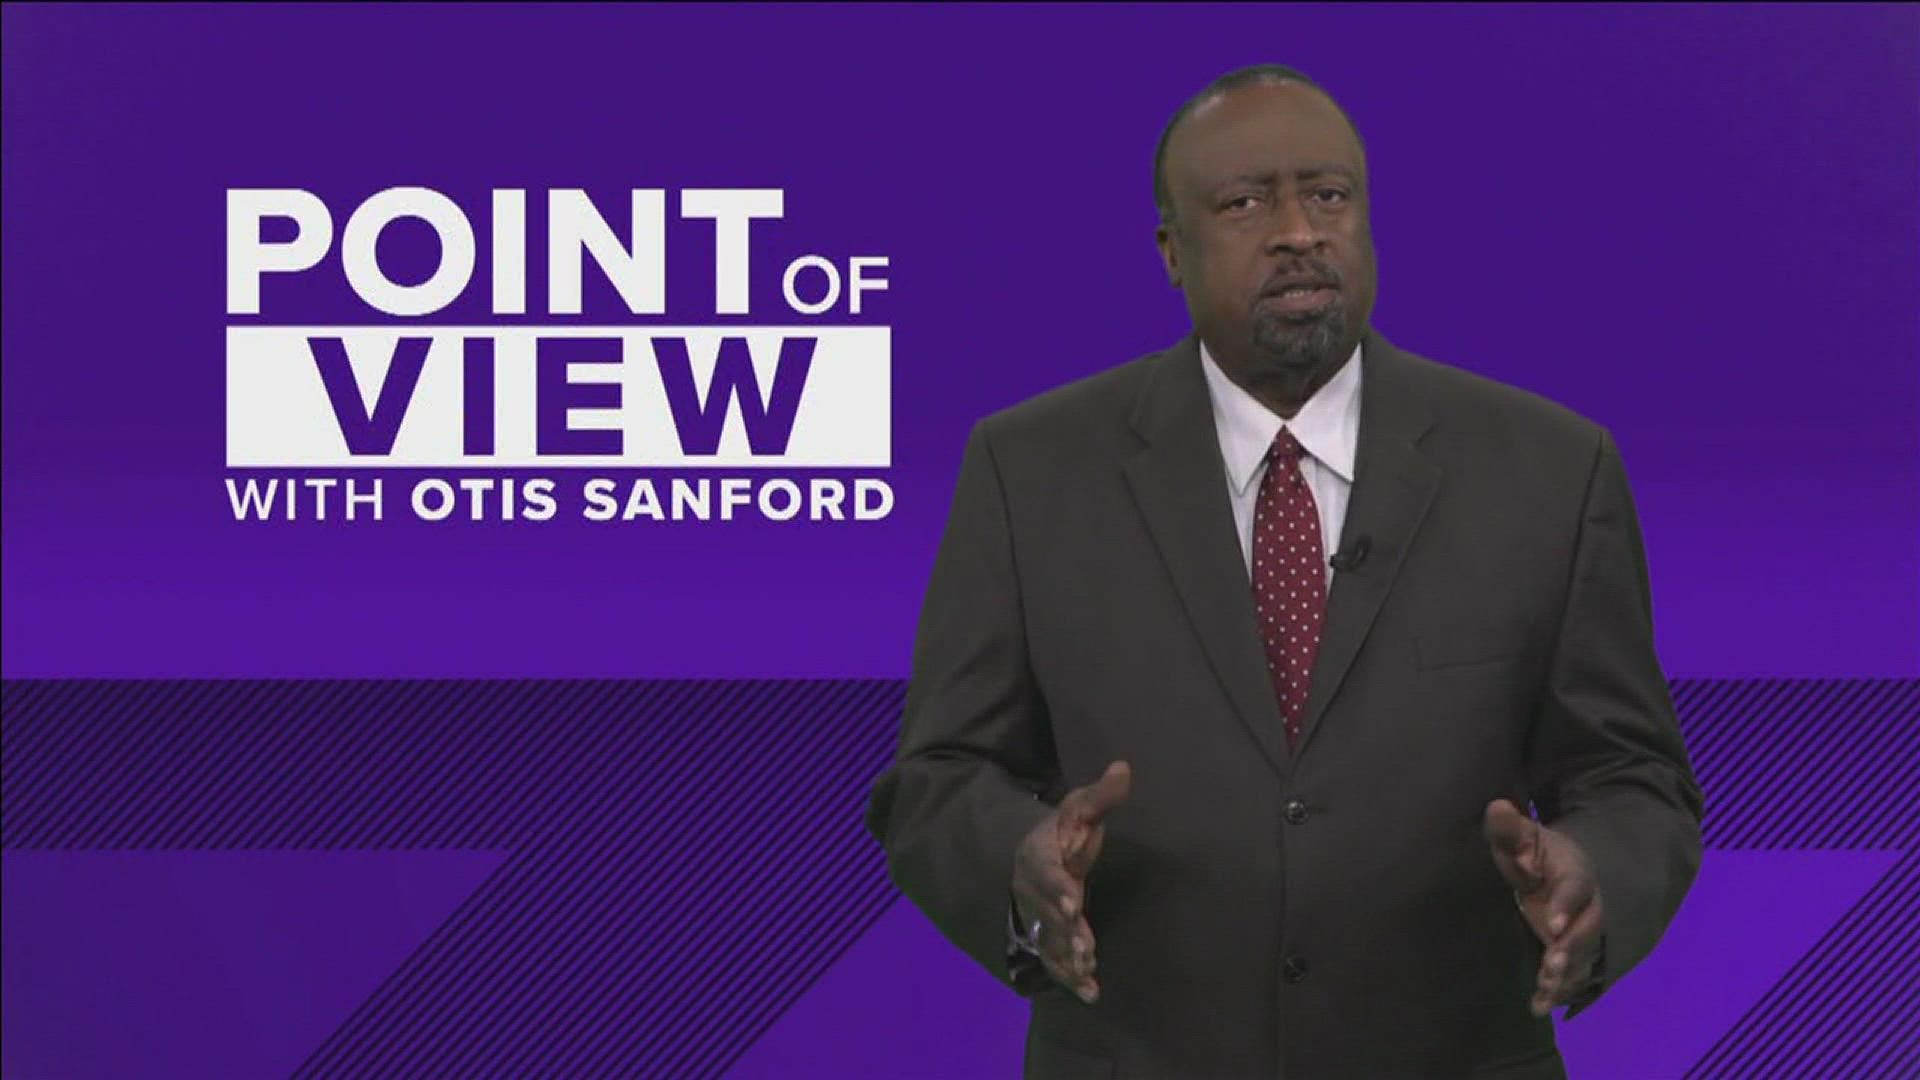 Otis Sanford shares his point of view on Tennessee's abortion ban after the latest statewide poll from Vanderbilt University was released.